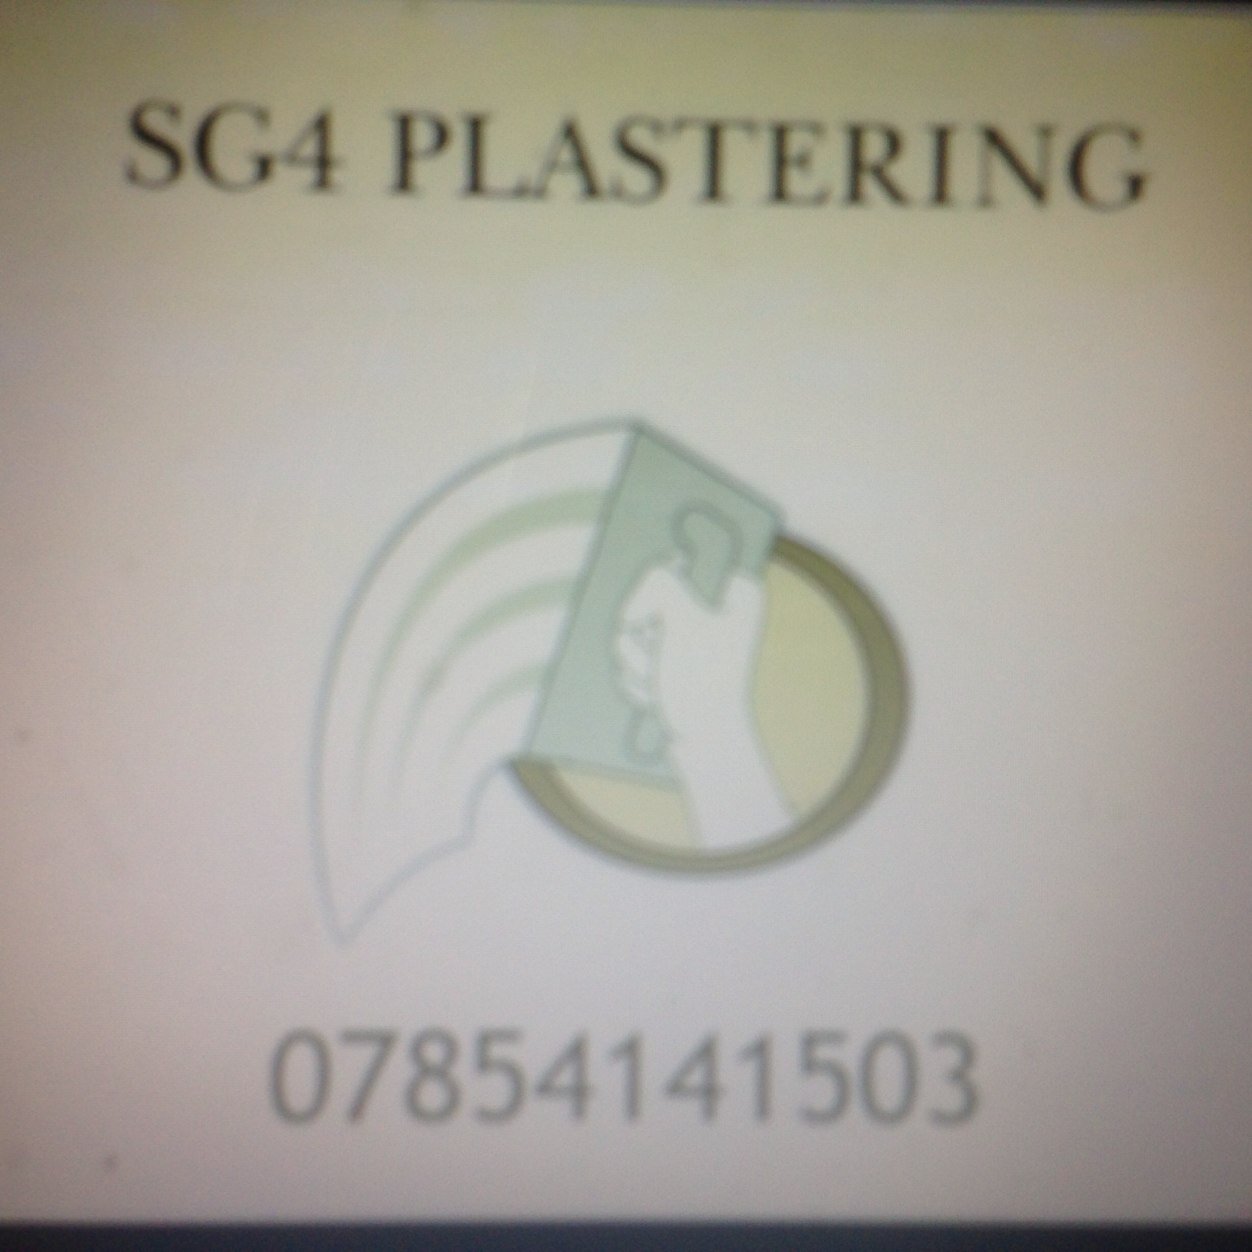 Sg4 plastering for all aspects of plastering call 07854141503 for a free quote